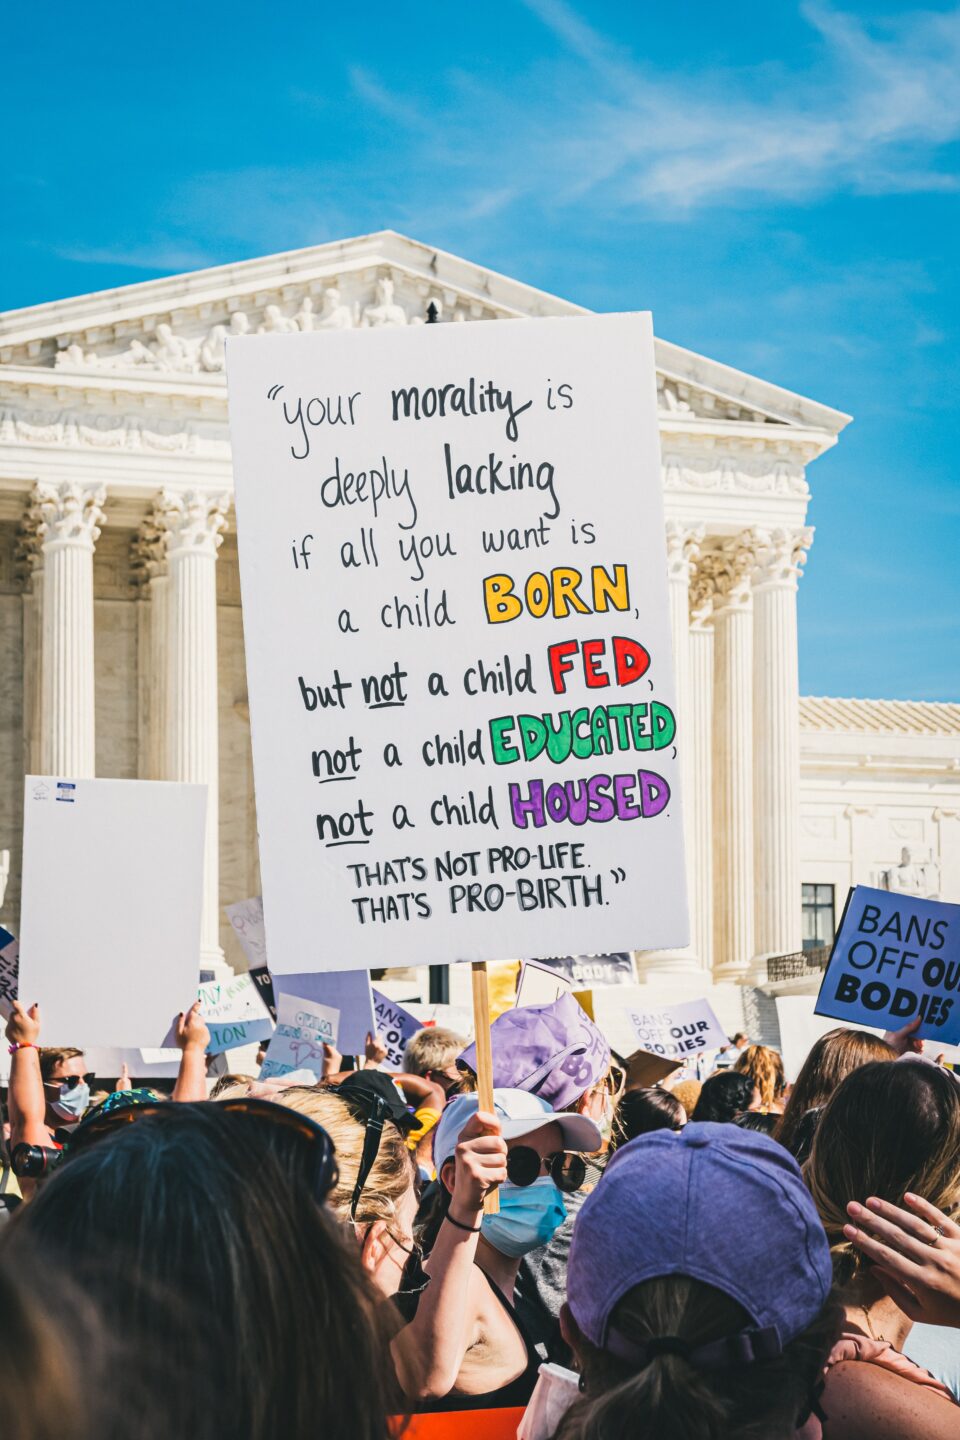 A protester outside the Supreme Court holds a sign that reads “your morality is deeply lacking if all you want is a child born, but not a child fed, not a child educated, not a child housed. That’s not pro-life. That’s pro-birth.”